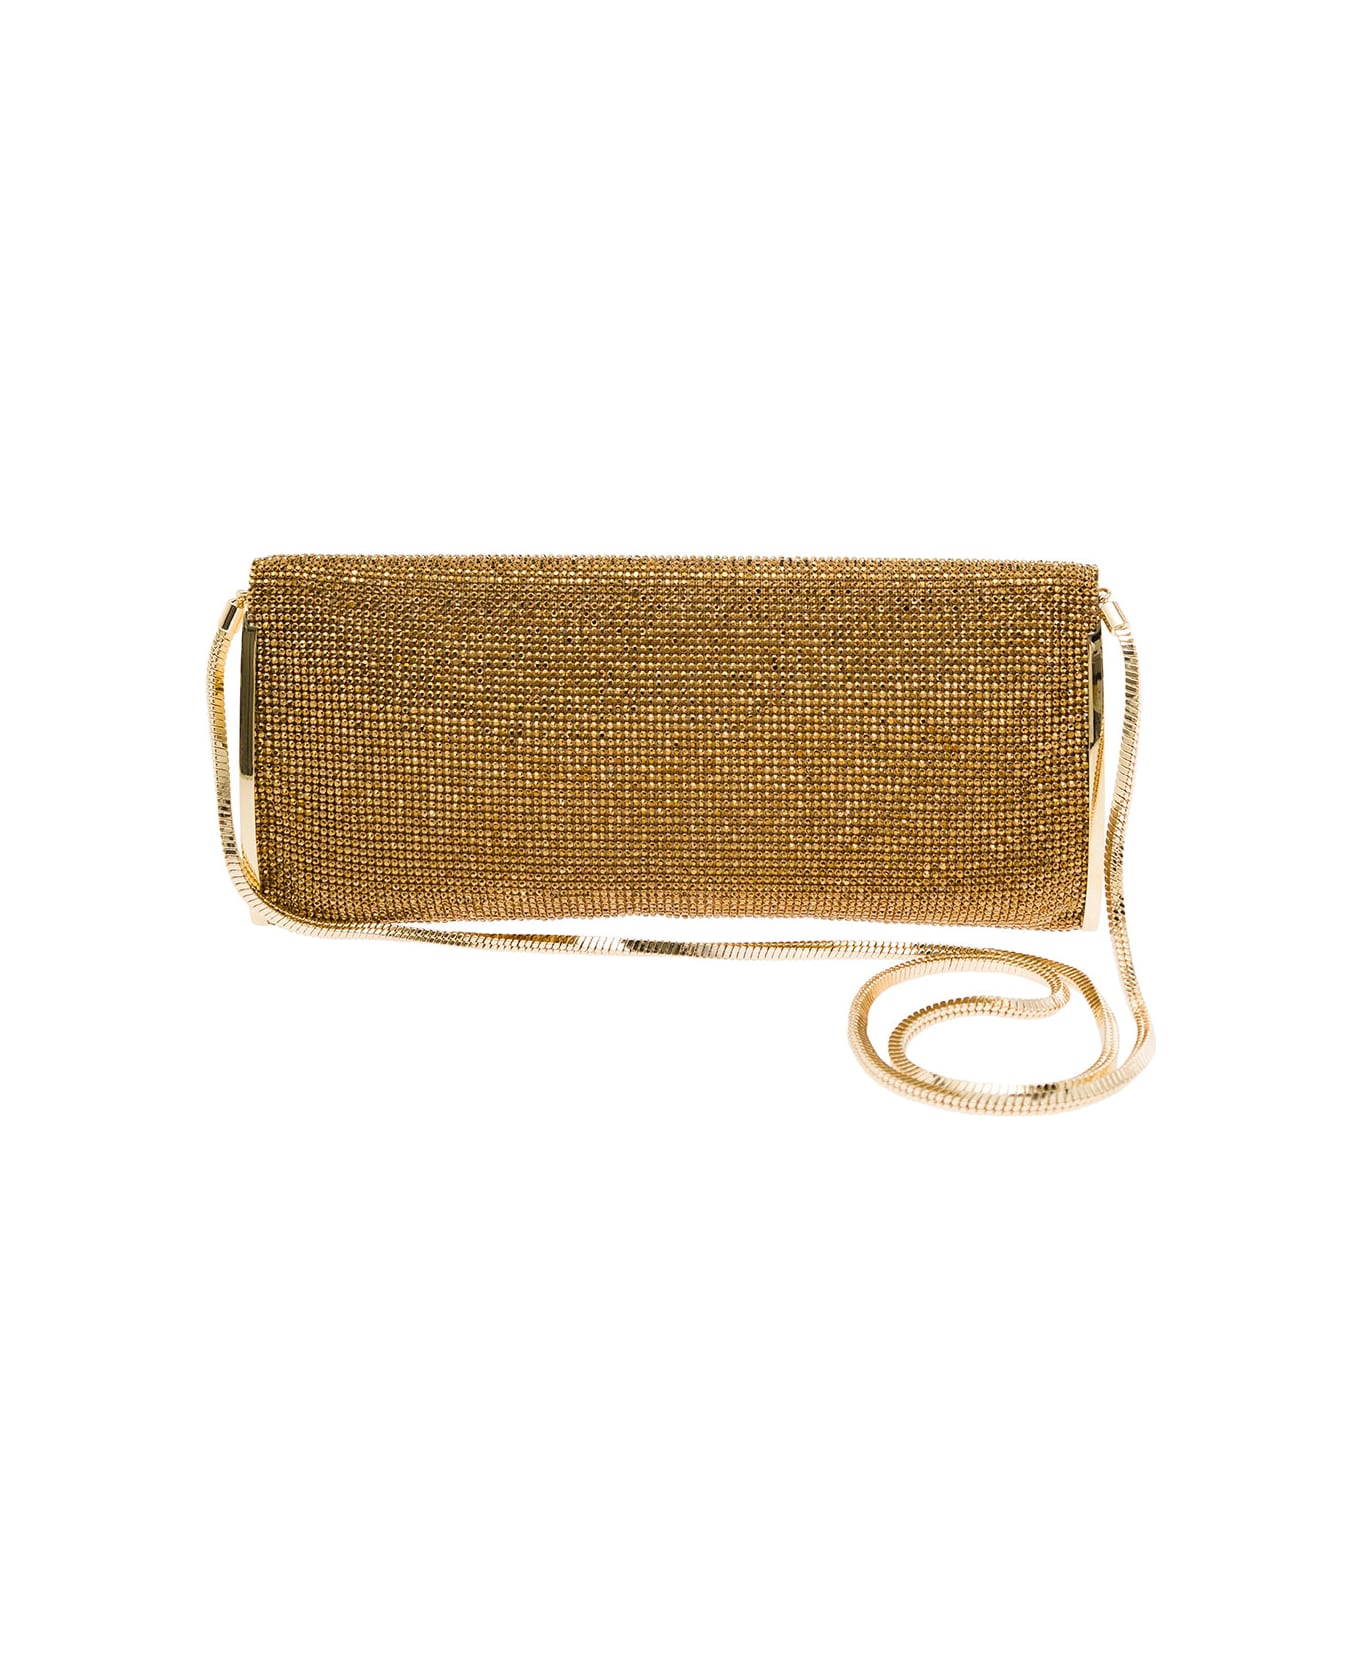 Benedetta Bruzziches 'kate' Gold Clutch With All-over Rhinestone In Mesh Woman